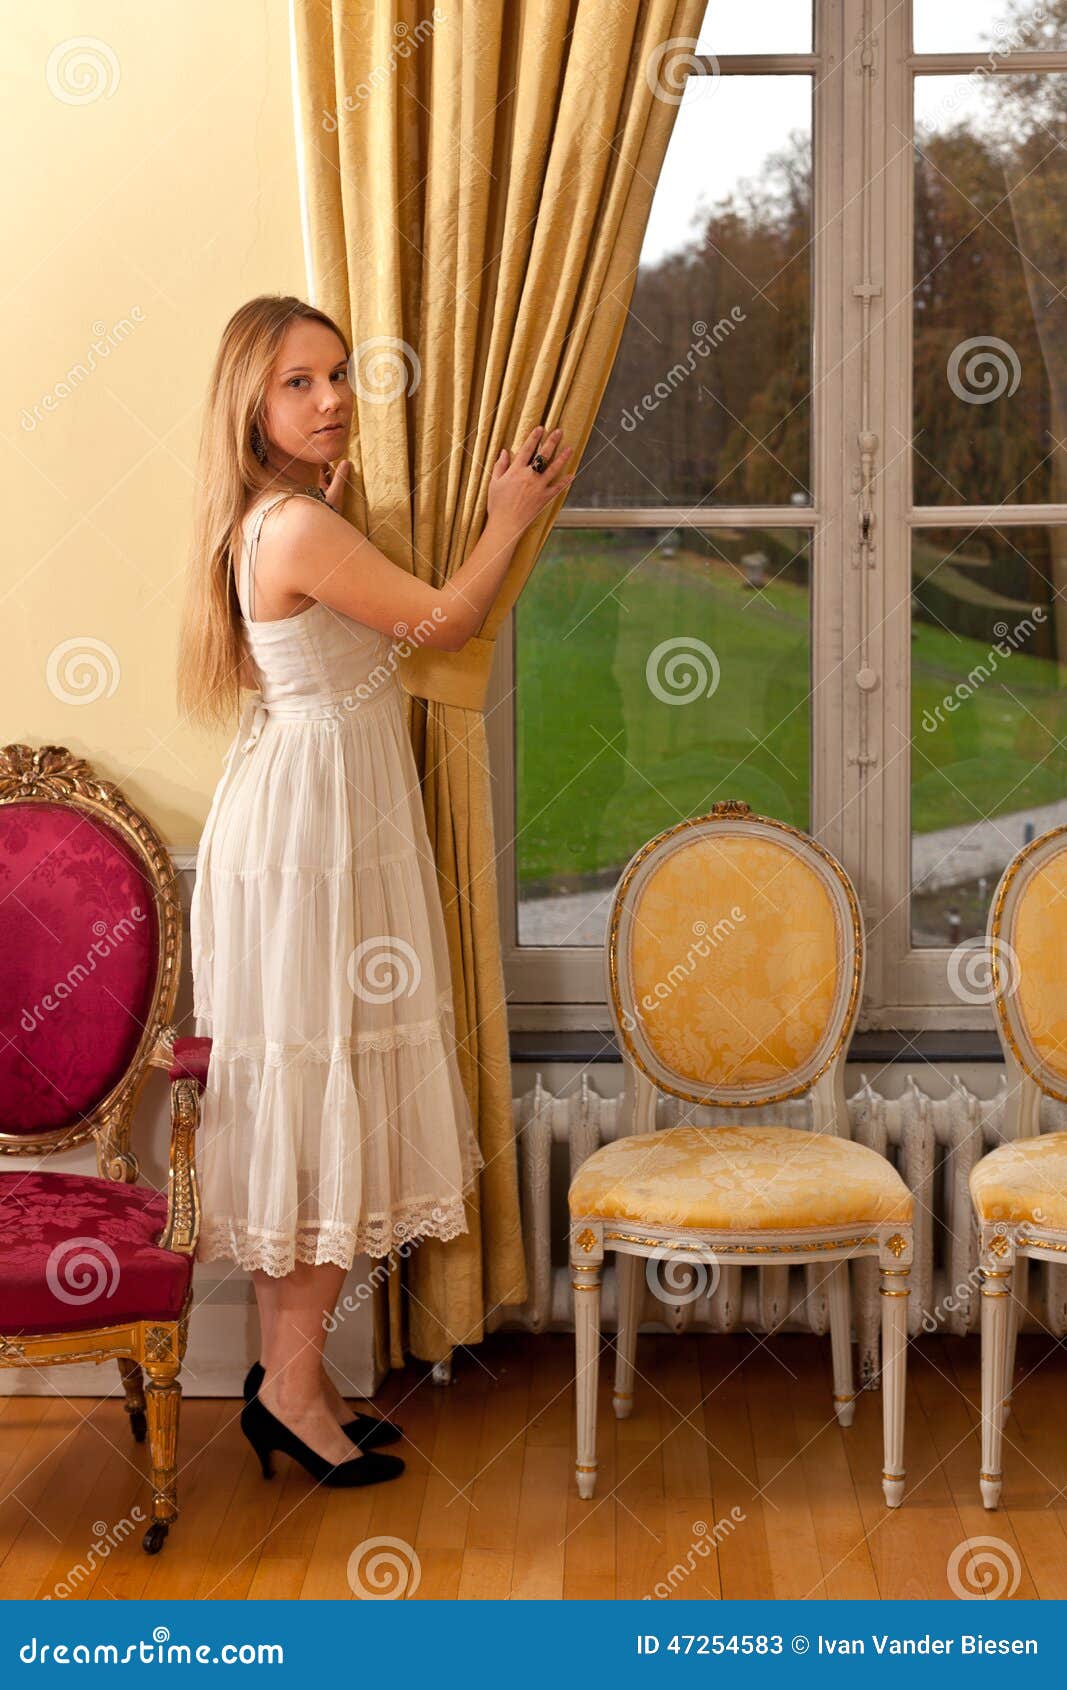 Woman castle window park stock image. Image of curtains ...